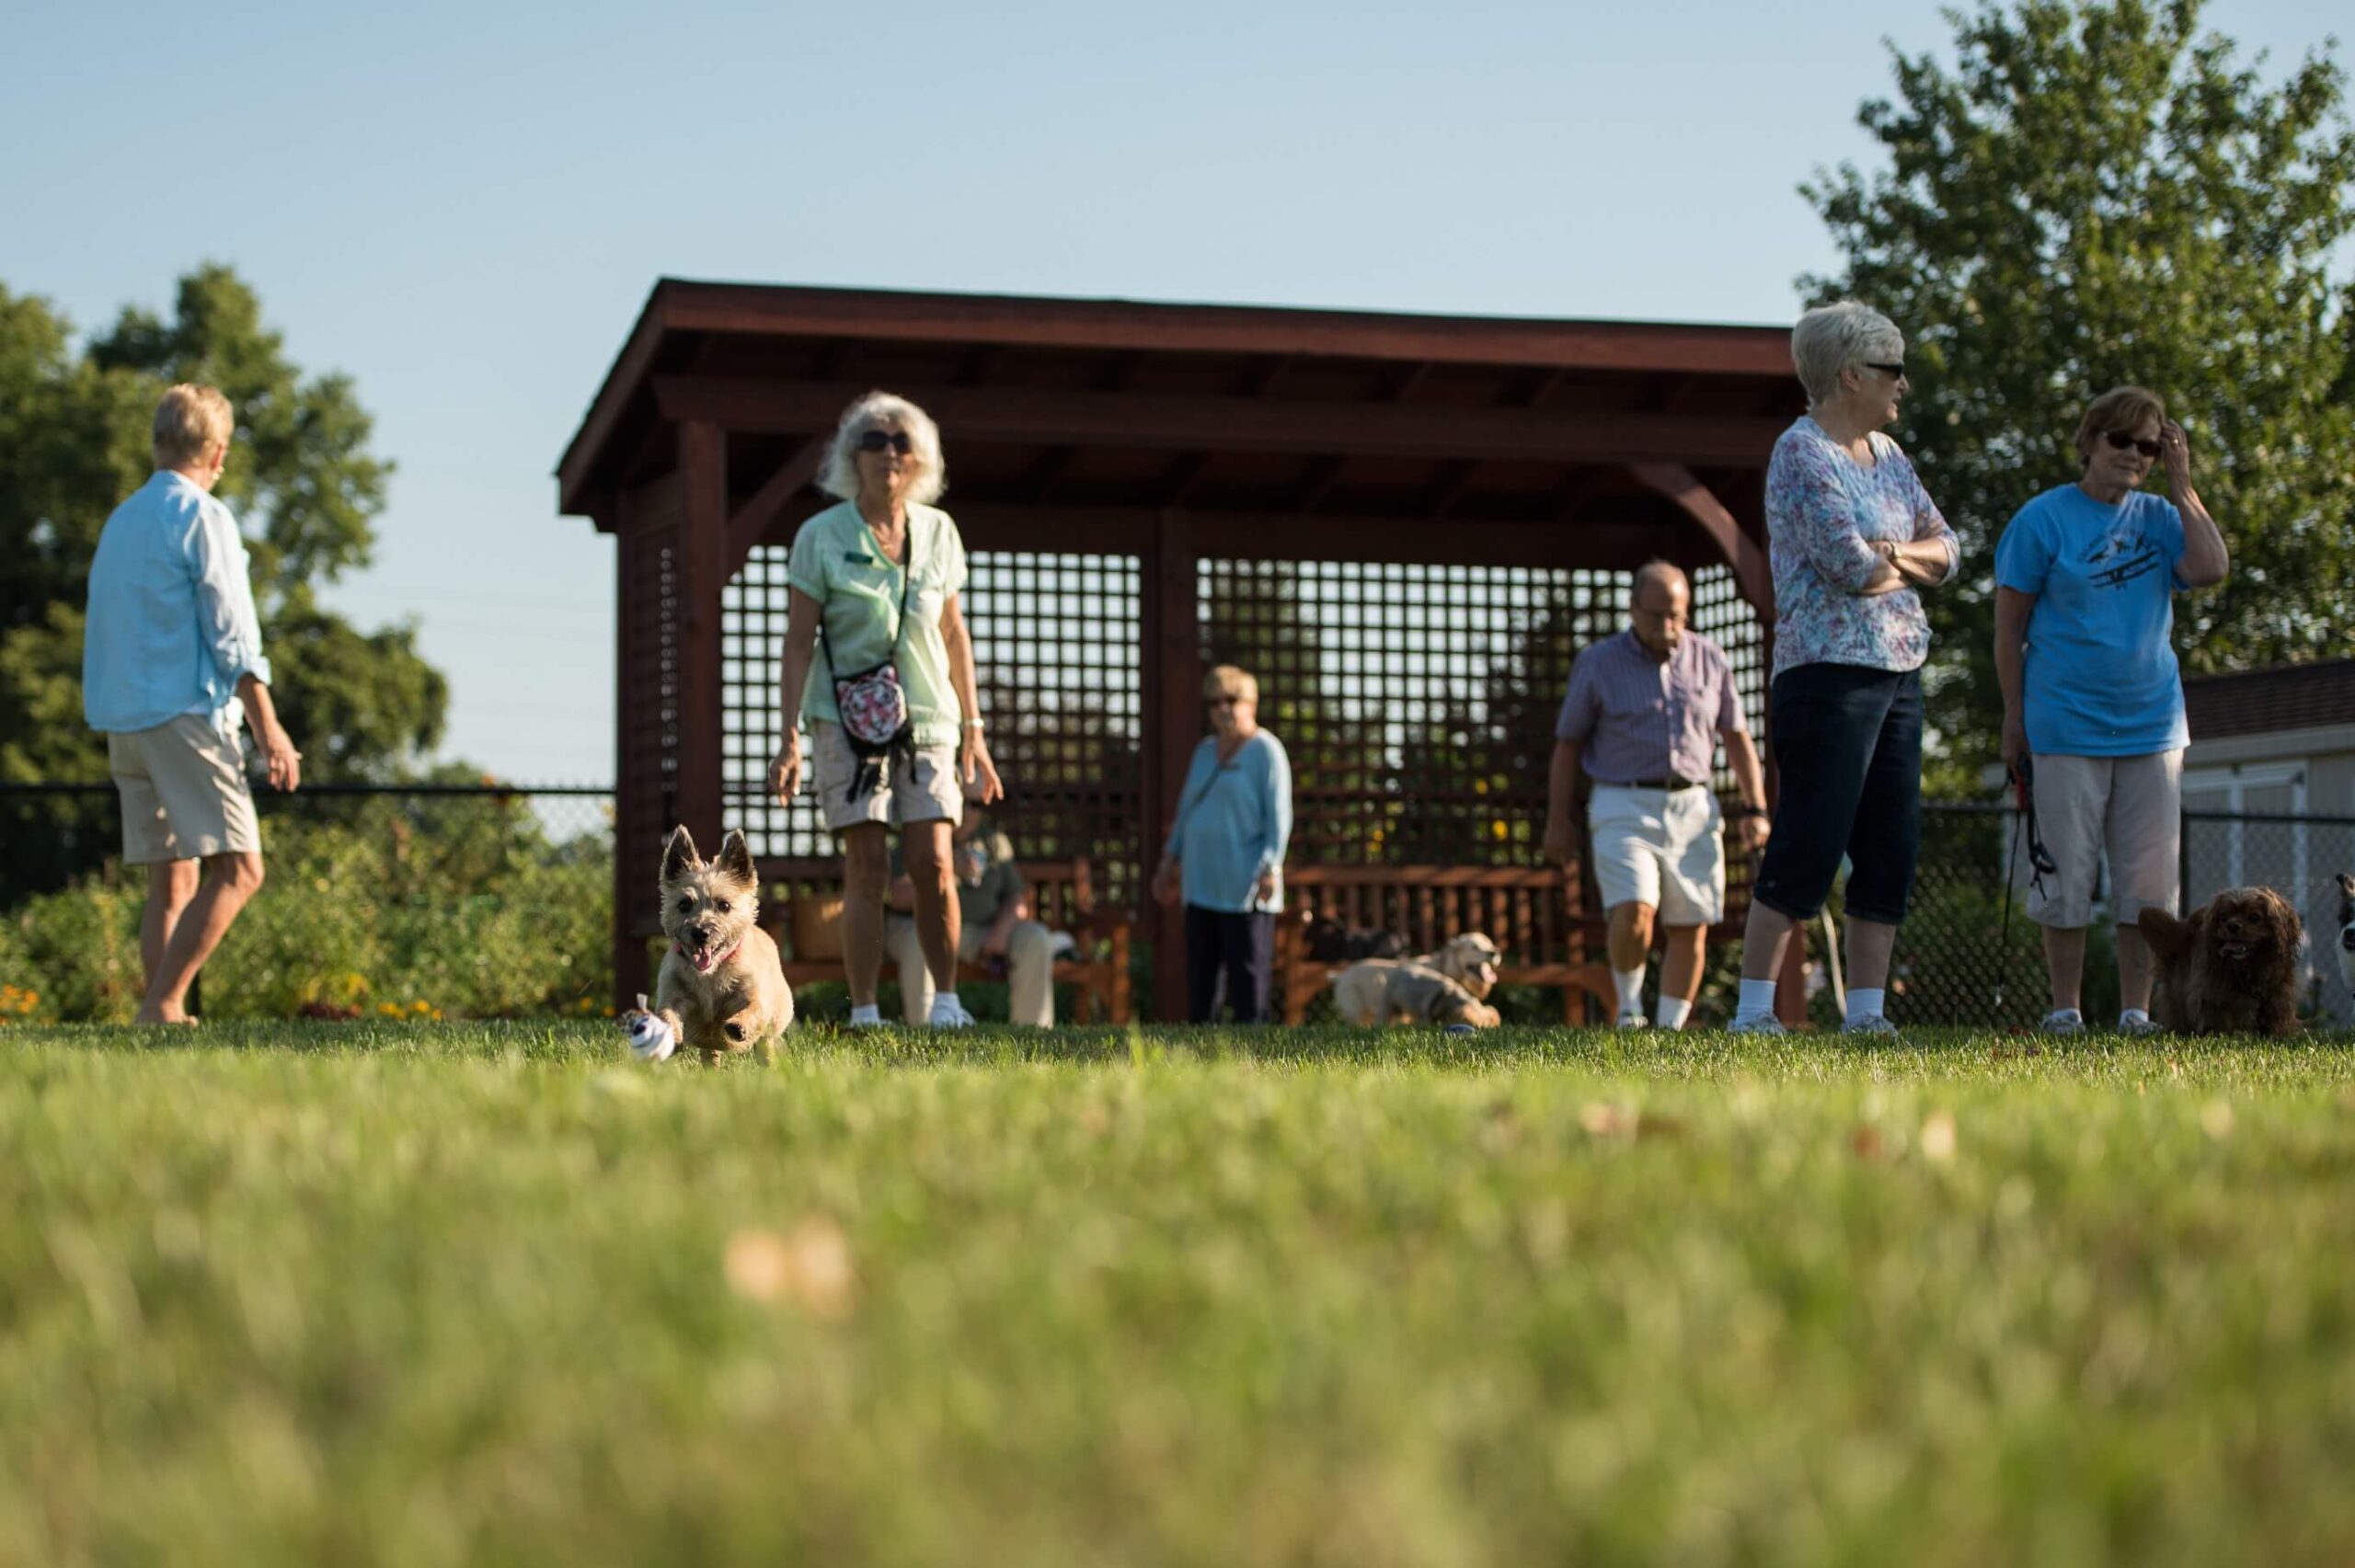 A retirement community engaging in a leisurely walk with their dogs in a grassy area.